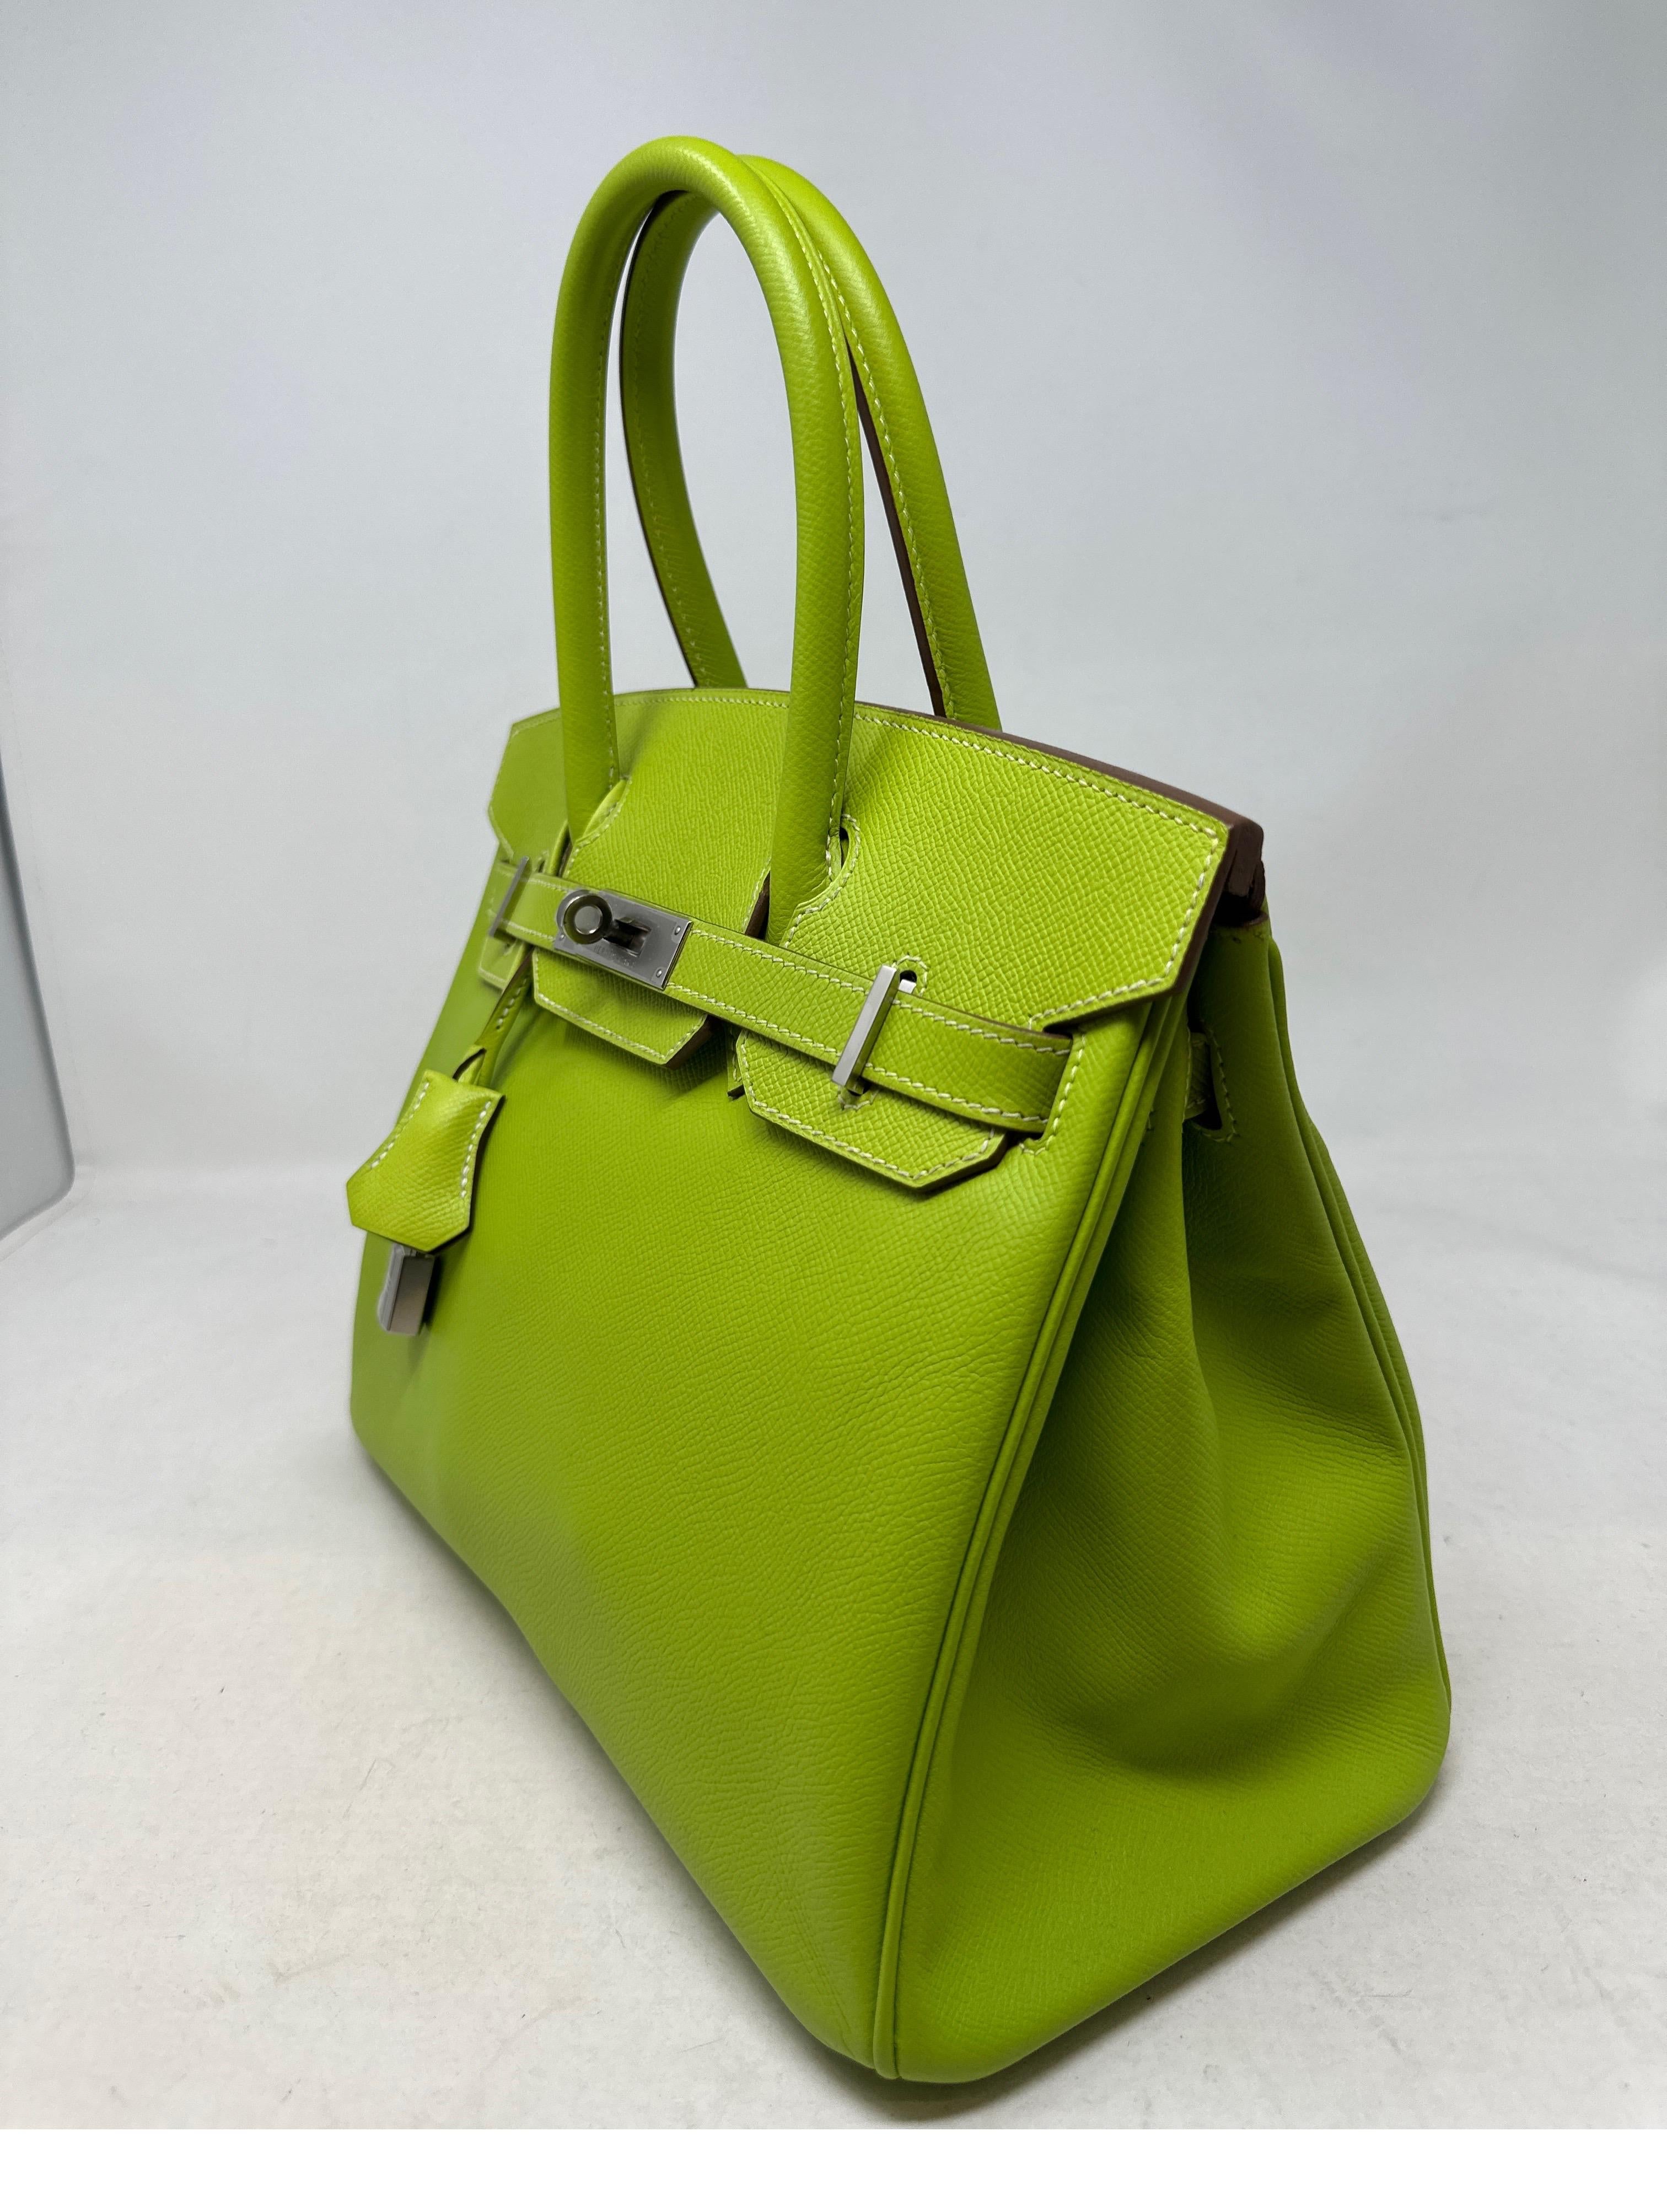 Hermes Lime Birkin 30 Bag  In Excellent Condition For Sale In Athens, GA